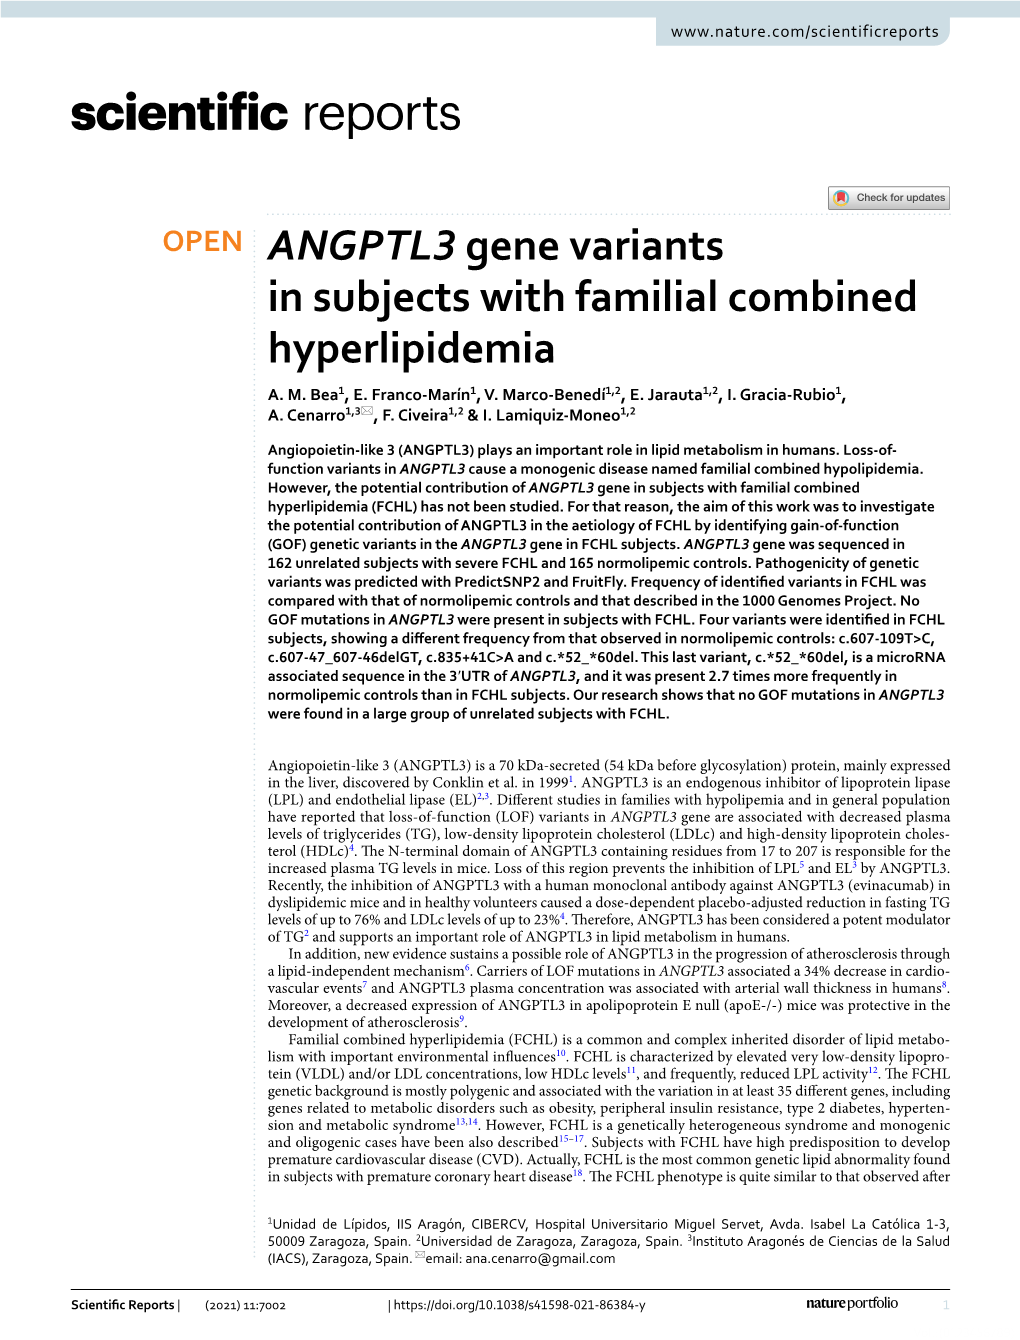 ANGPTL3 Gene Variants in Subjects with Familial Combined Hyperlipidemia A